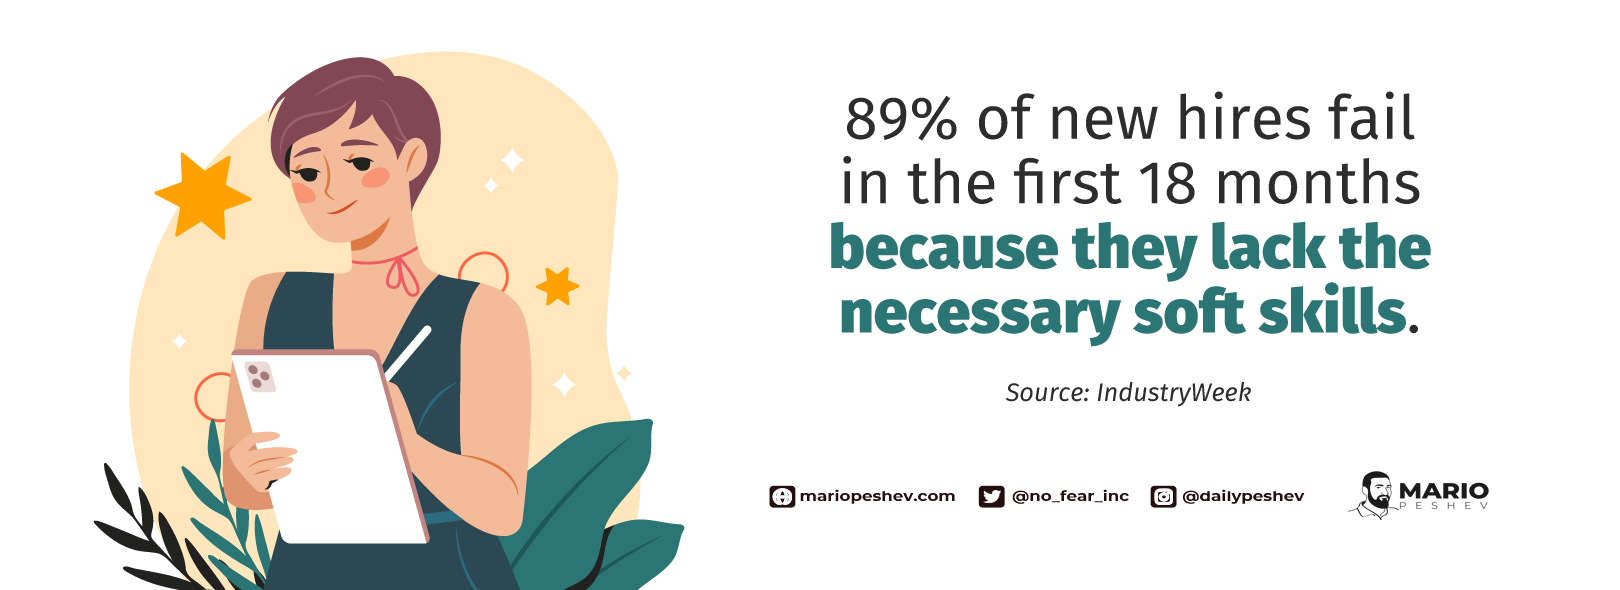 89% of new hires fail in the first 18 months because they lack the necessary soft skills.